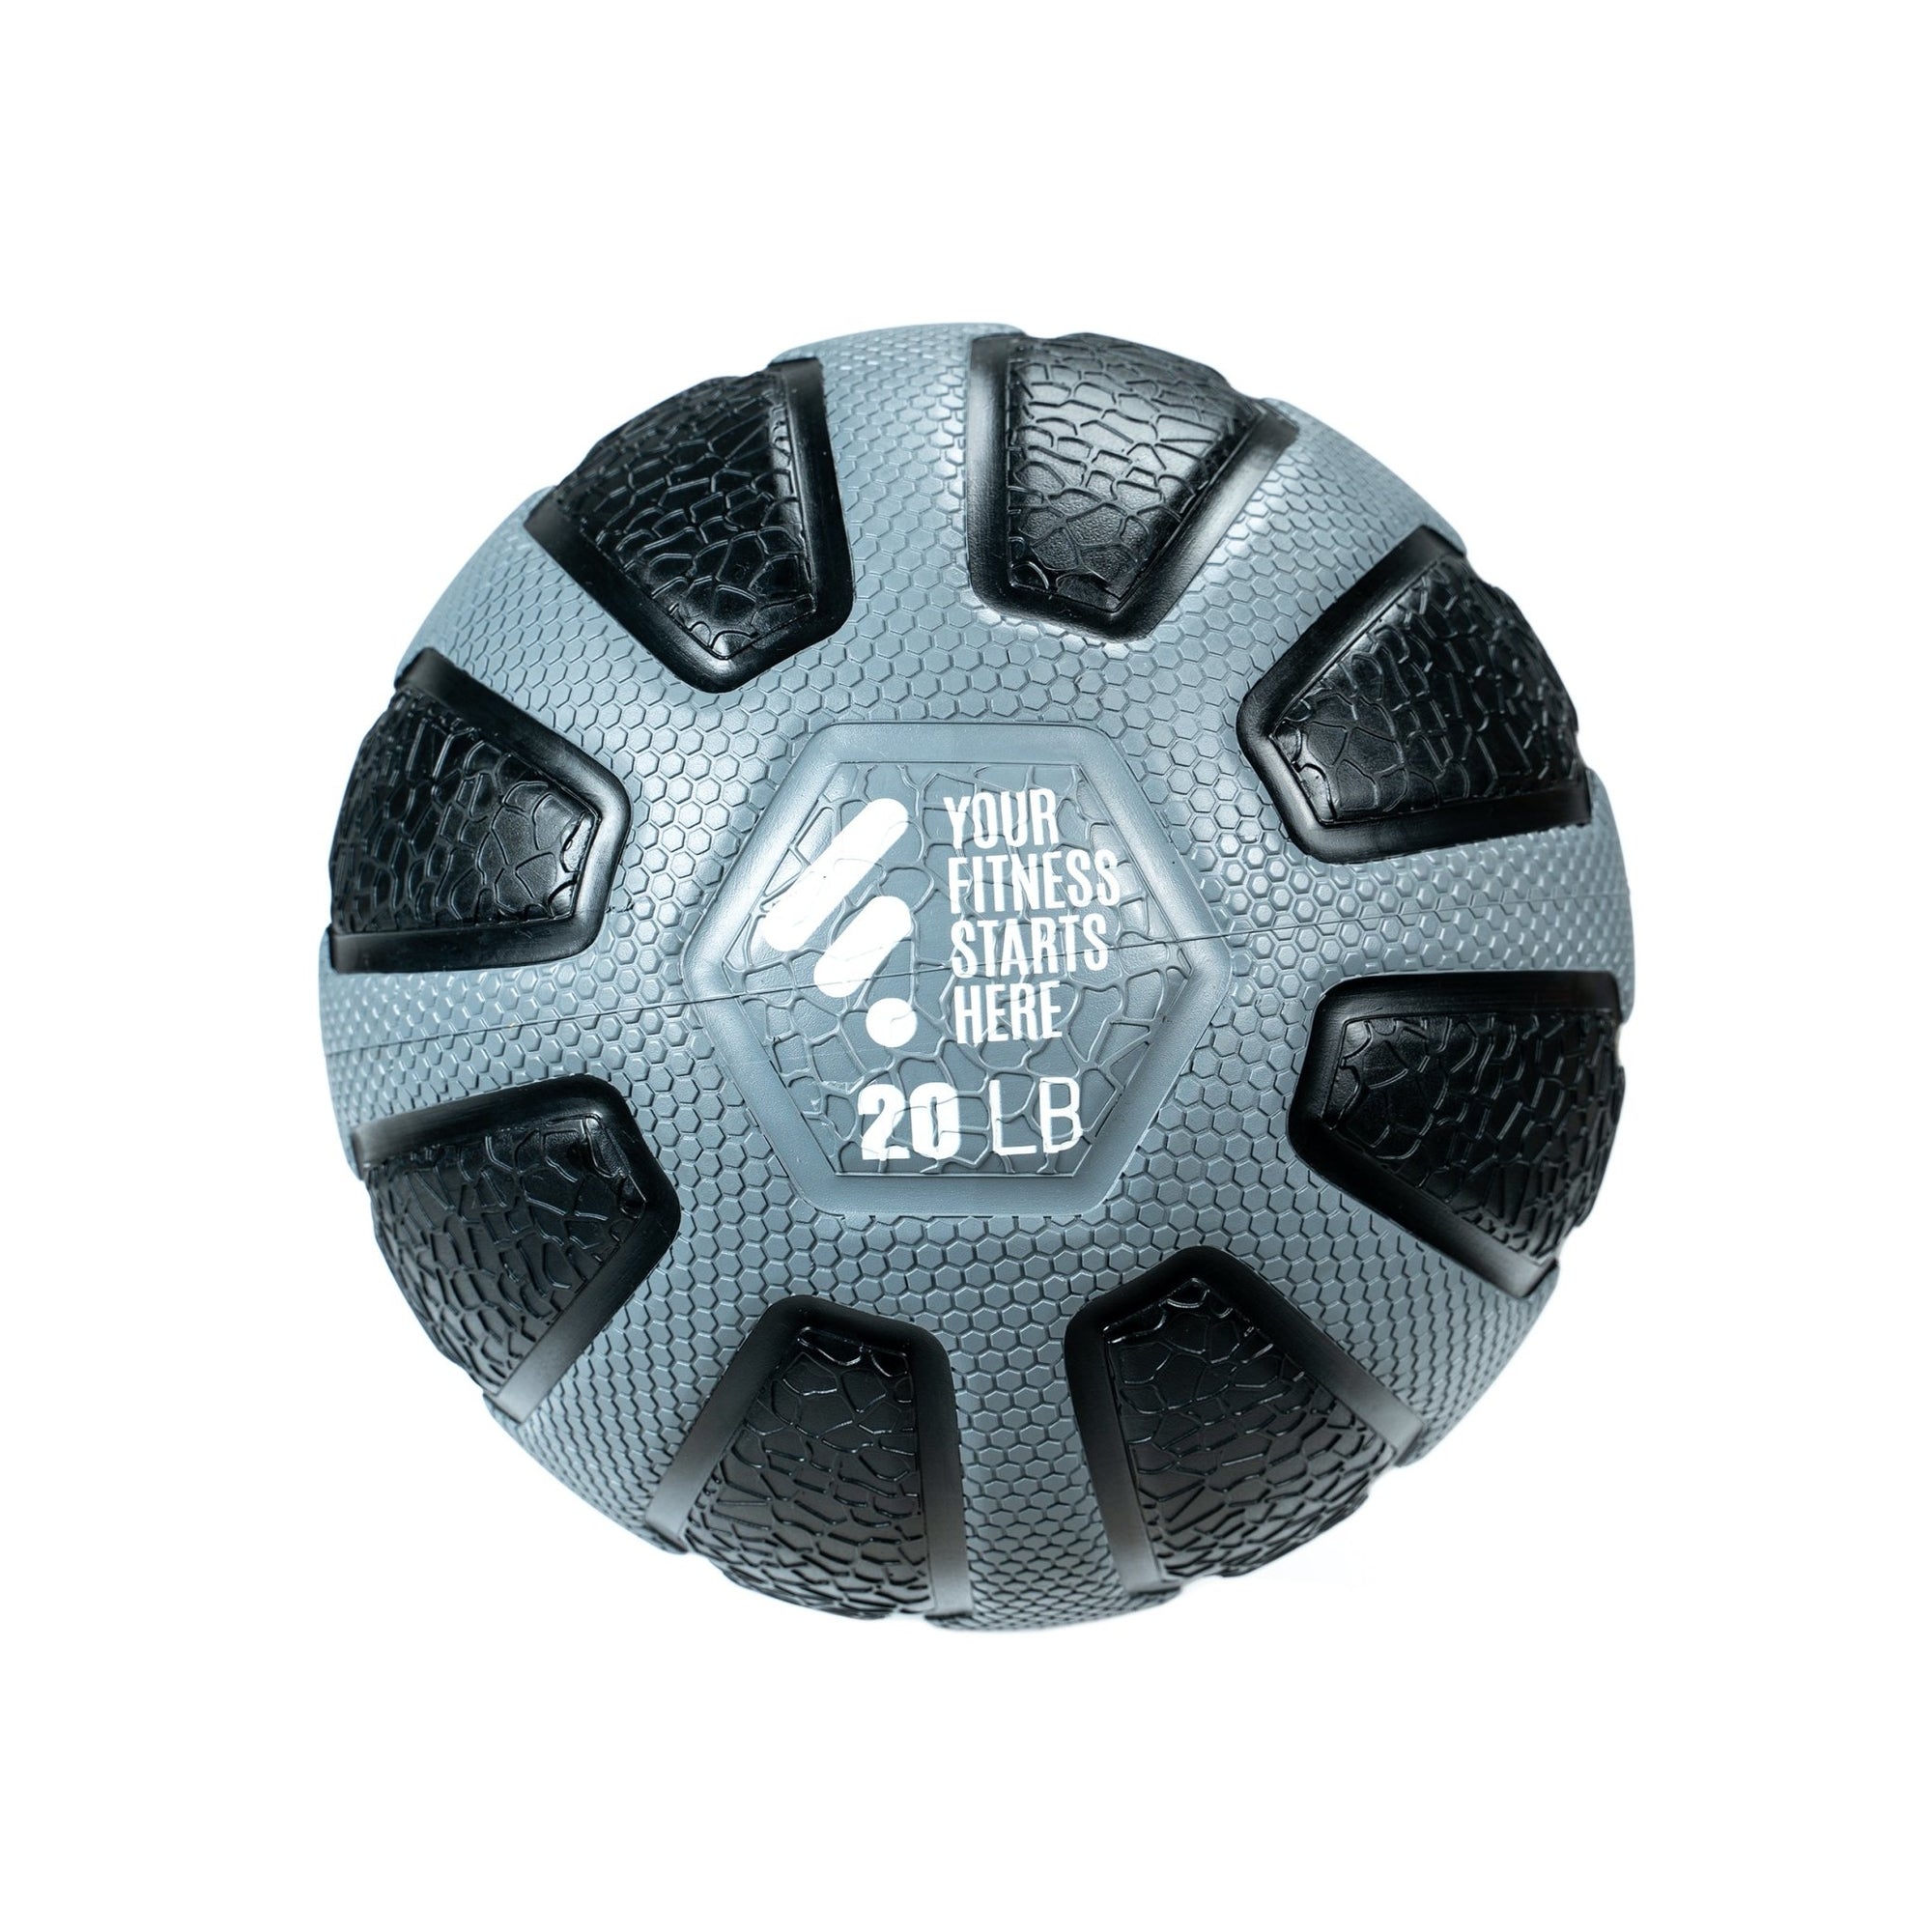 FitWay Equip. Max Grip Medicine Ball - 20 Lbs - Fitness Experience